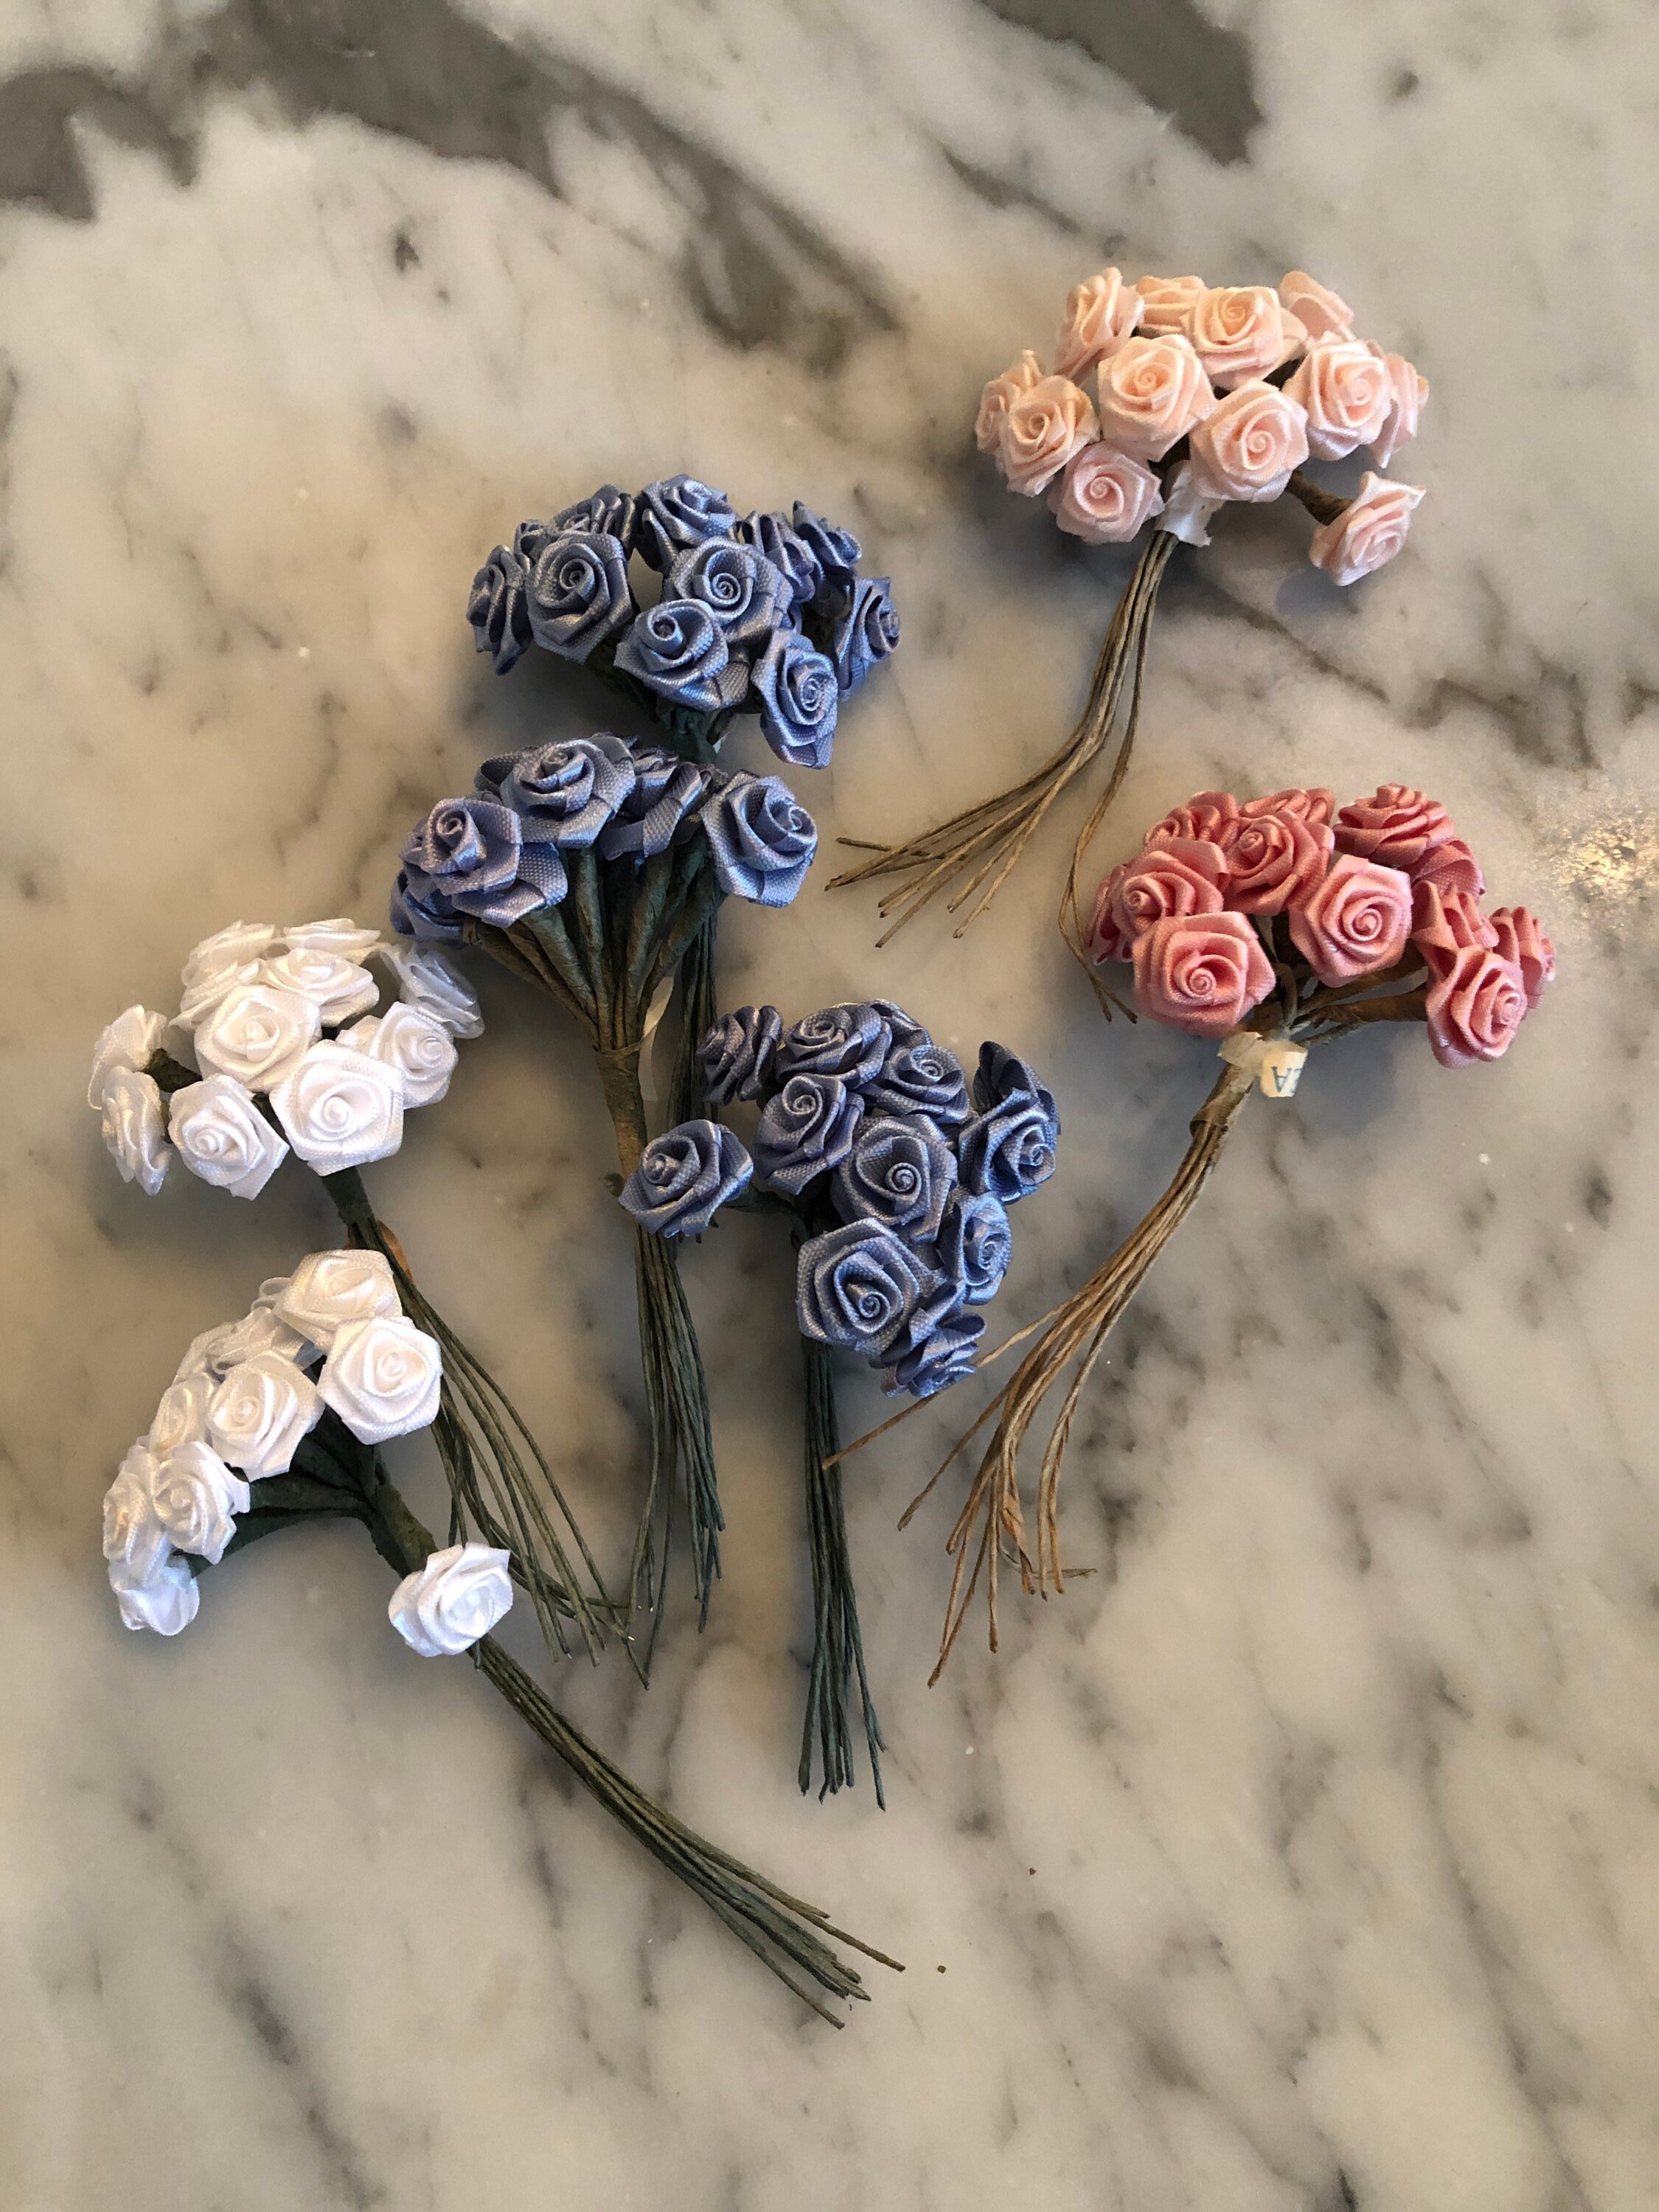 crafting satin rose bouquet on wire stems for hat making doll making corsage making more scrapbooking NOS silk